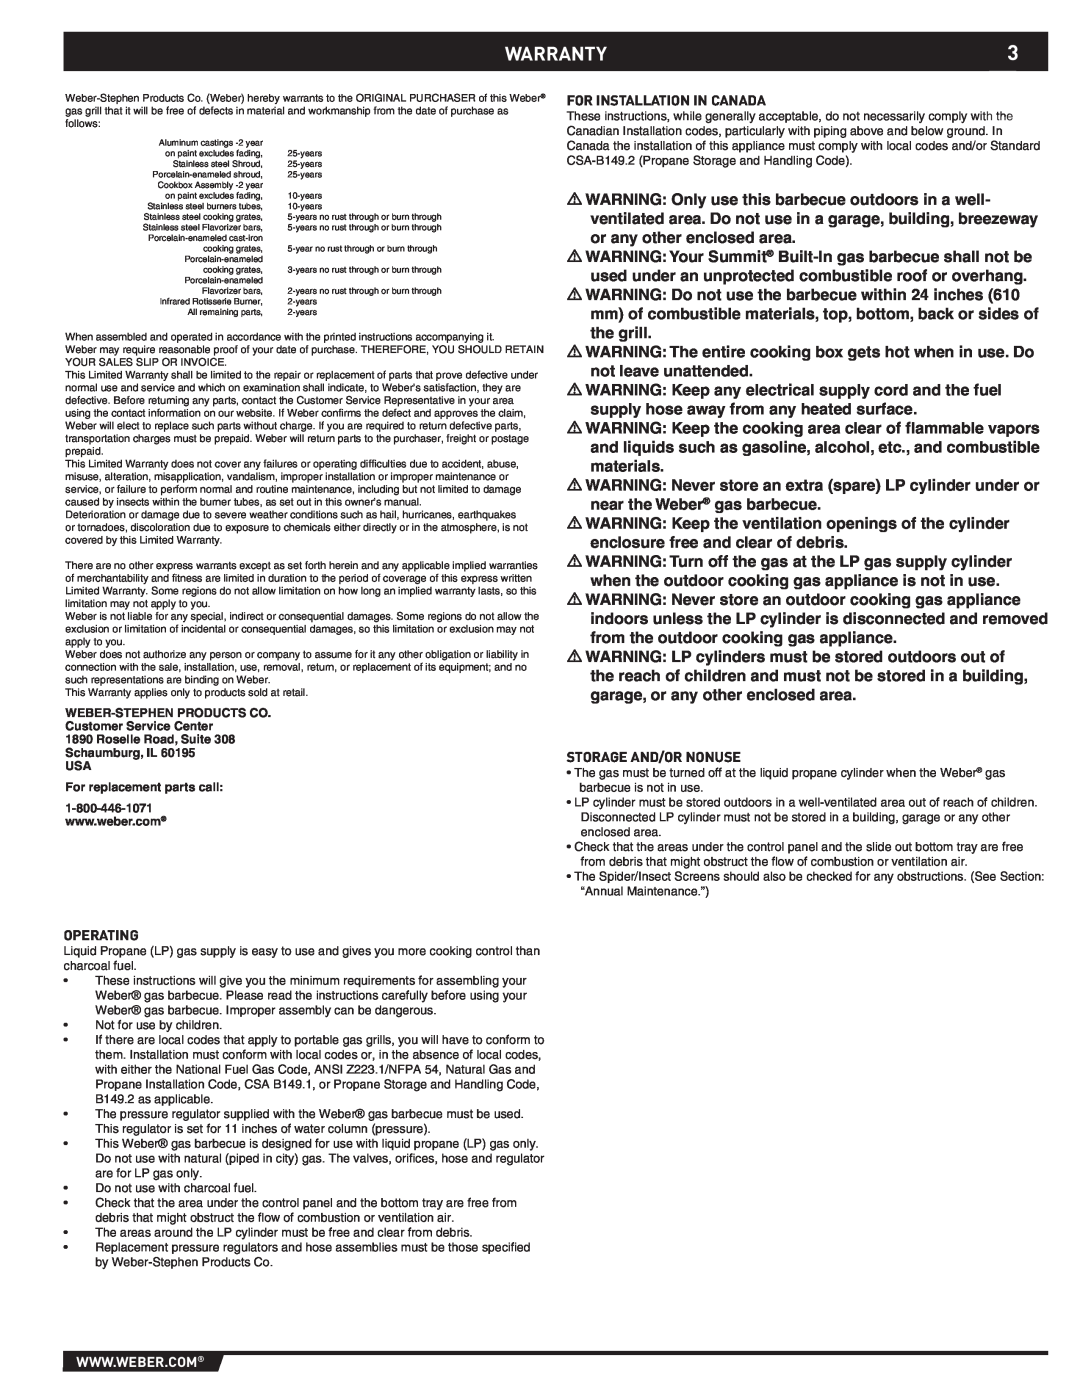 Summit 43176 manual Warranty, For Installation In Canada, Storage And/Or Nonuse, Operating 